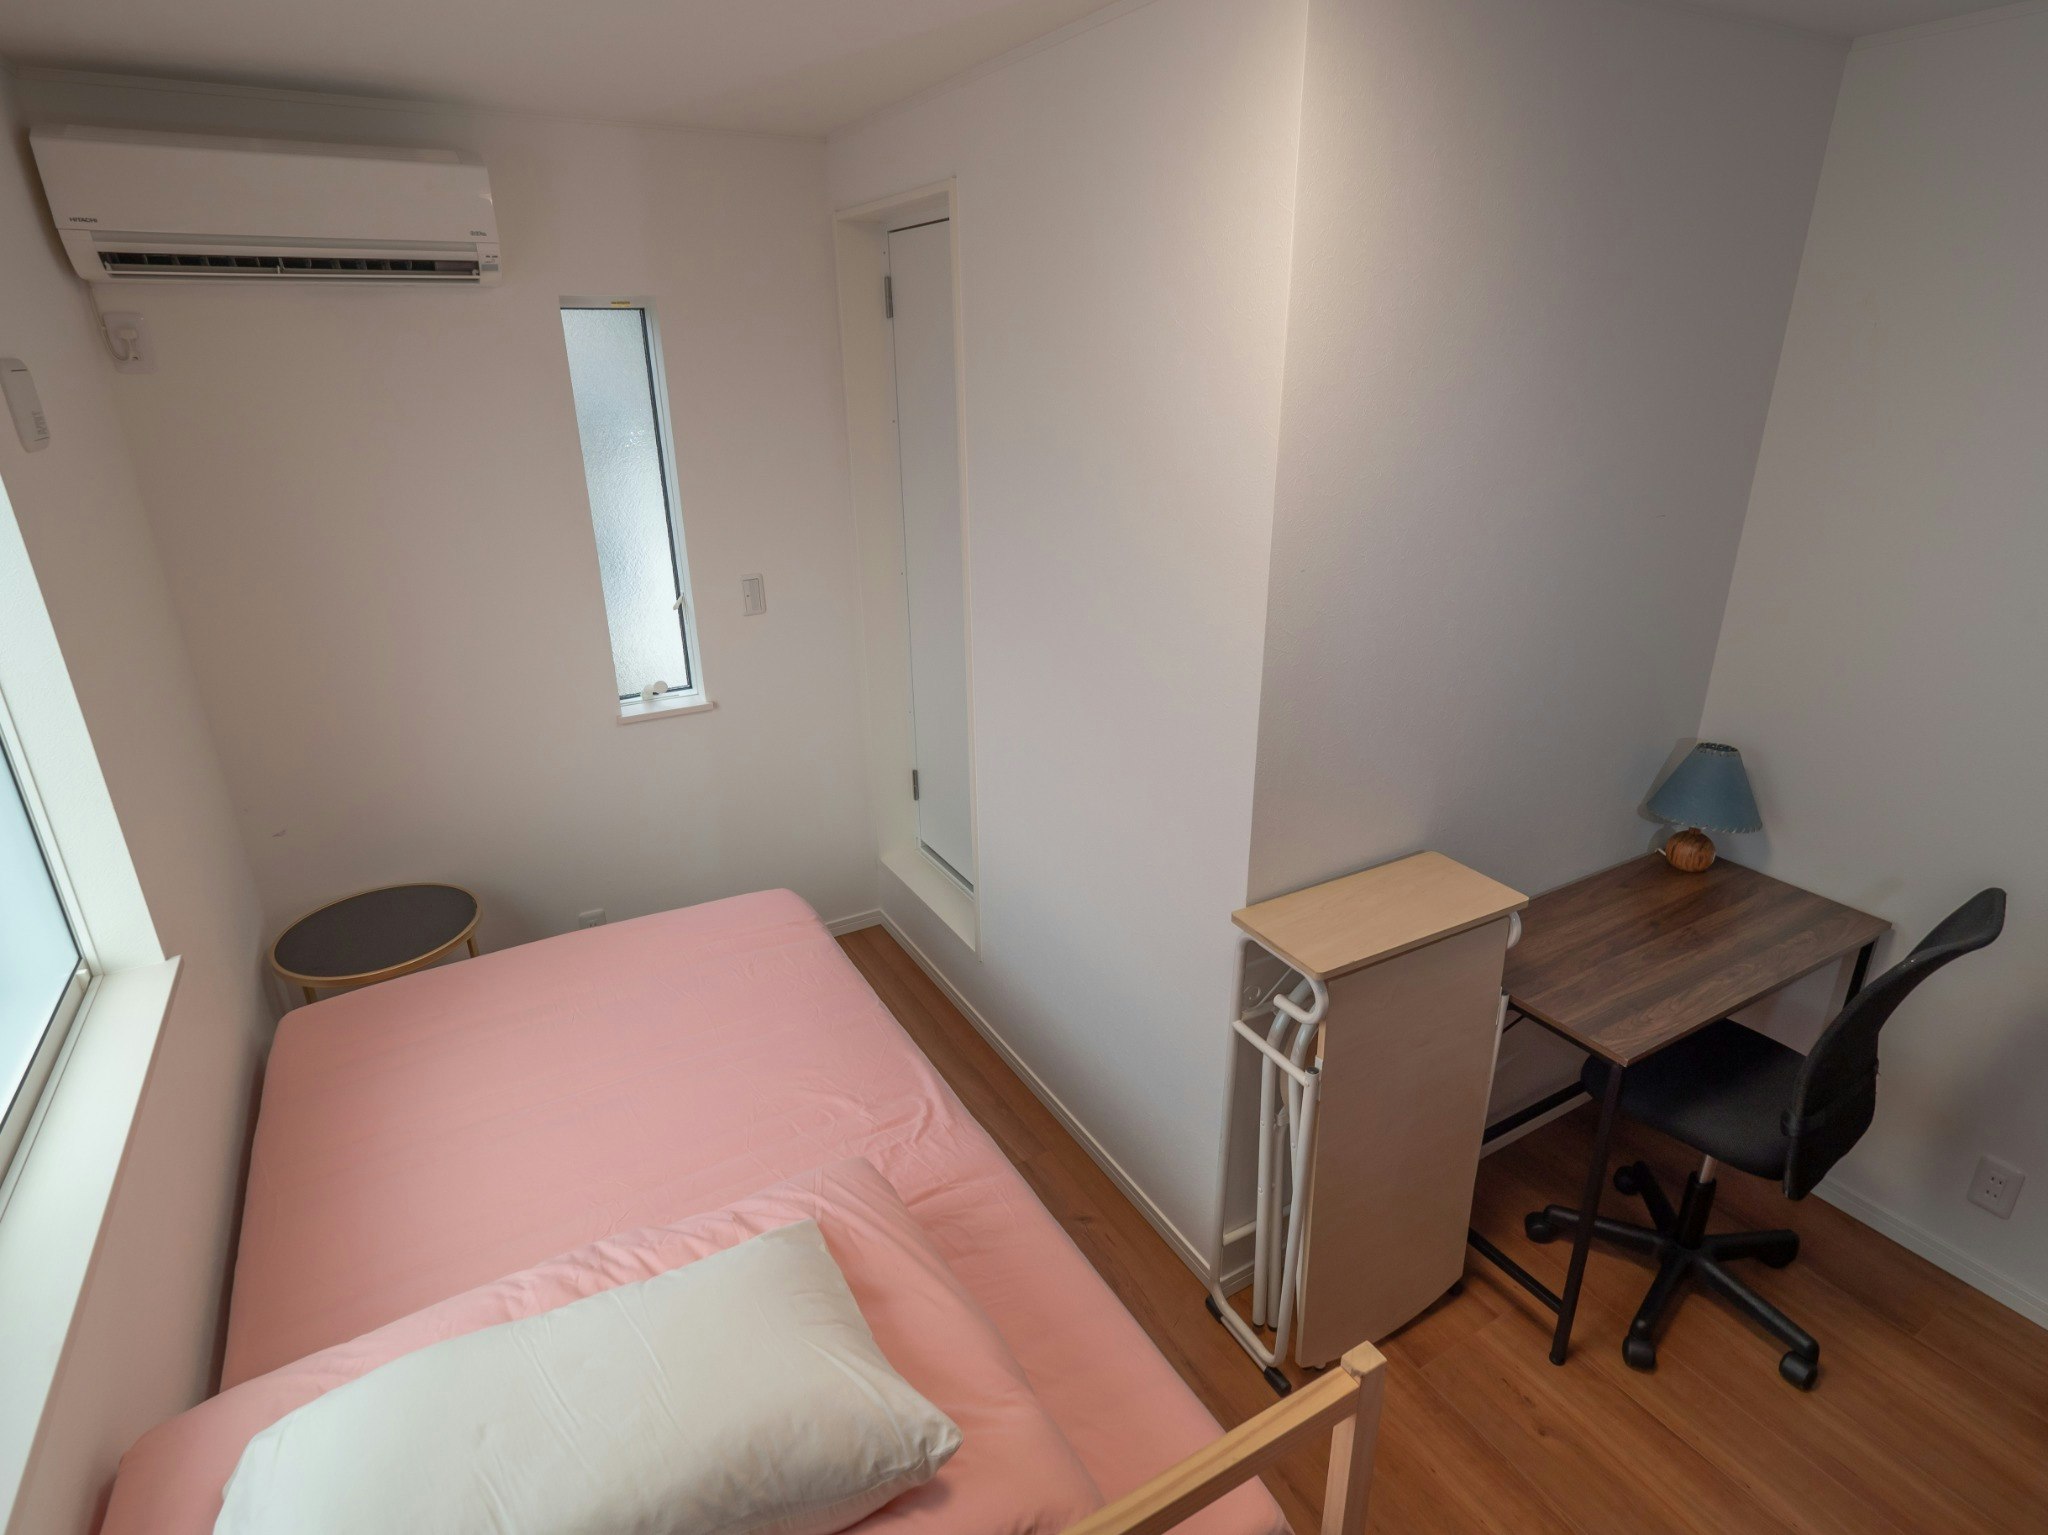 Double Room (West) (Min. 1 female in the guest)